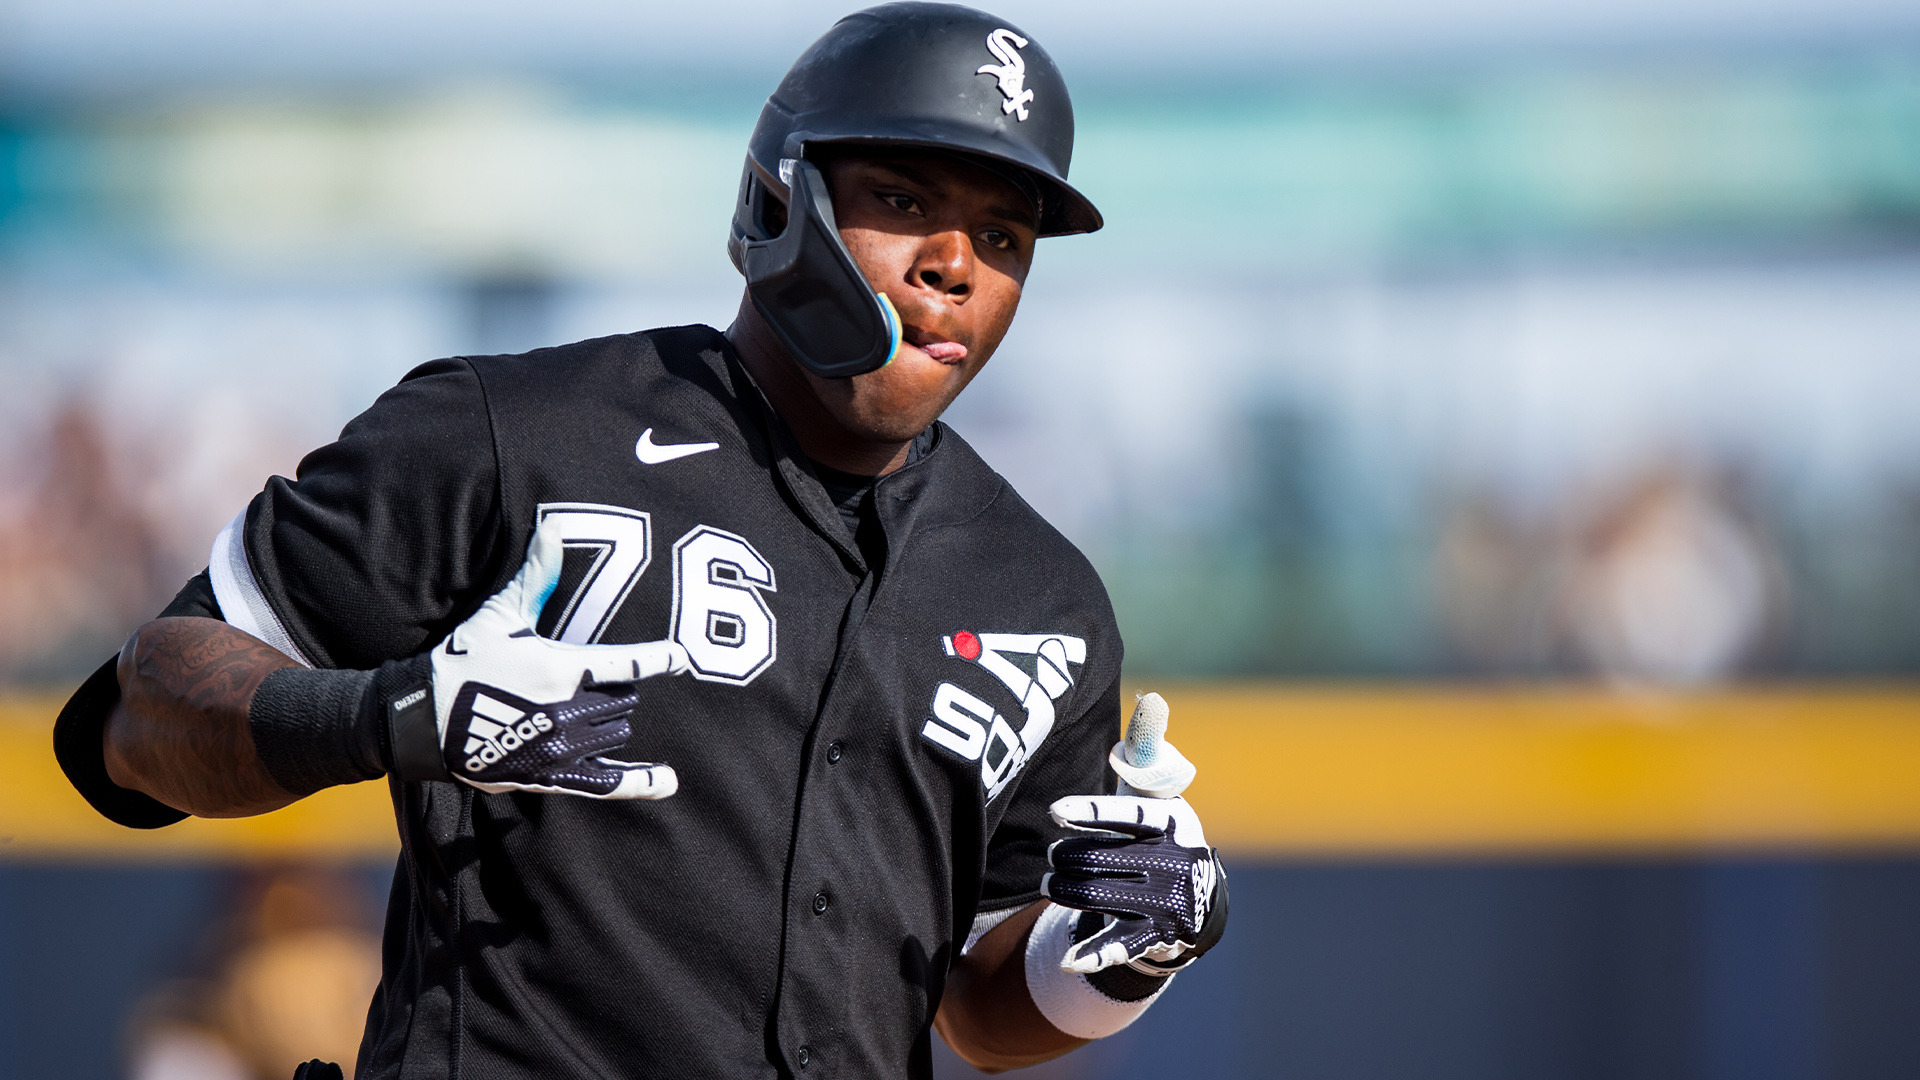 670 The Score - White Sox closer Liam Hendriks dishes on